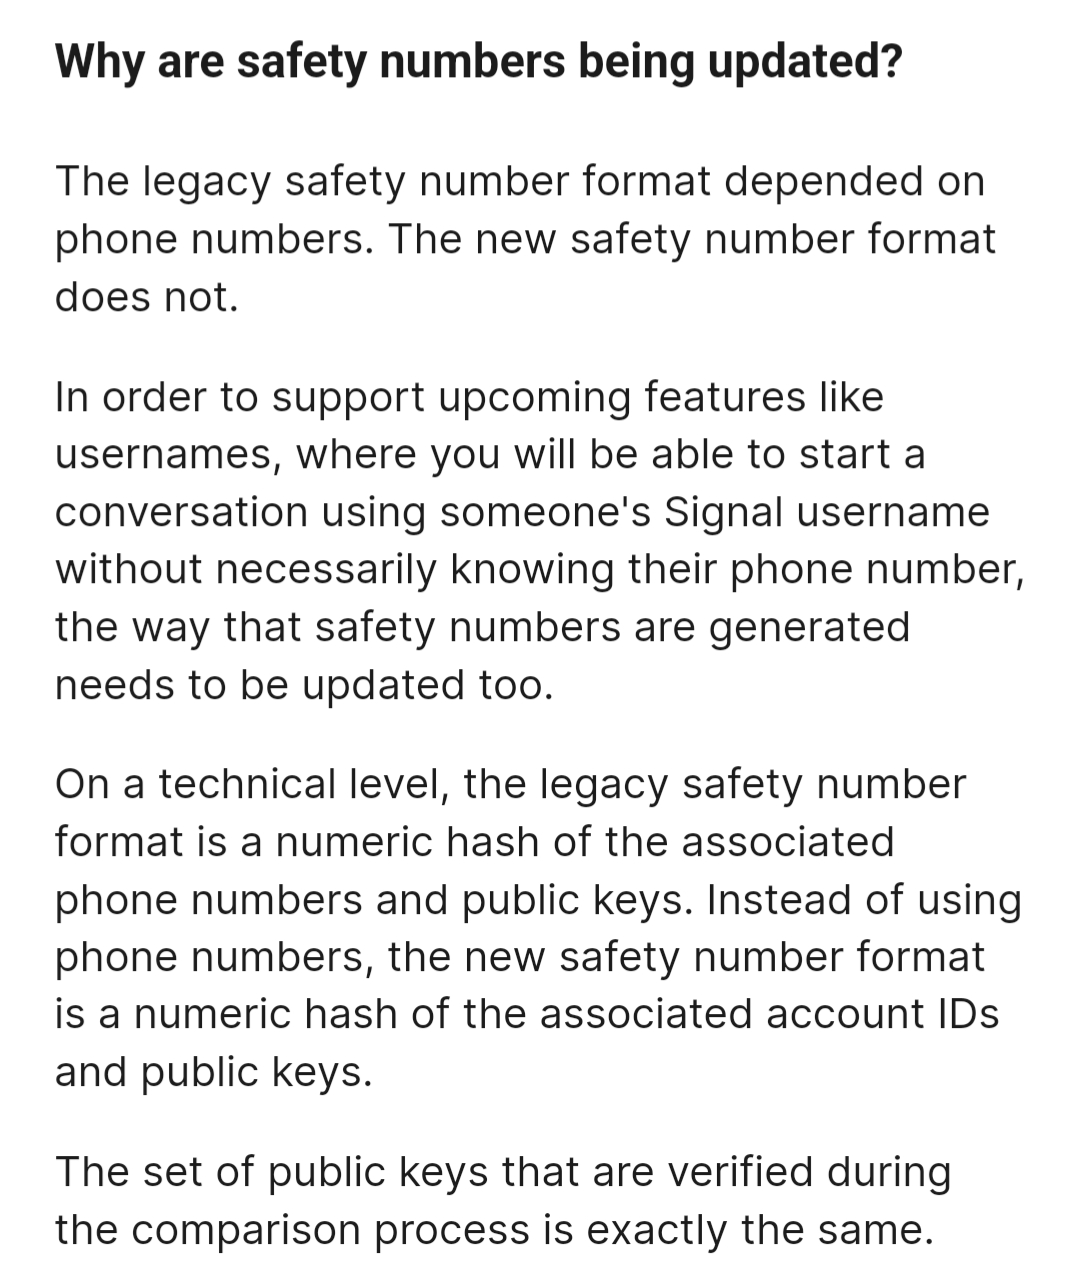 Image: Why are safety numbers being updated? //
The legacy safety number format depended on phone numbers. The new safety number format does not. //
In order to support upcoming features like usernames, where you will be able to start a conversation using someone's Signal username without necessarily knowing their phone number, the way that safety numbers are generated needs to be updated too. //
On a technical level, the legacy safety number format is a numeric hash of the associated phone numbers and public keys. Instead of using phone numbers, the new safety number format is a numeric hash of the associated account IDs and public keys. //
The set of public keys that are verified during the comparison process is exactly the same.